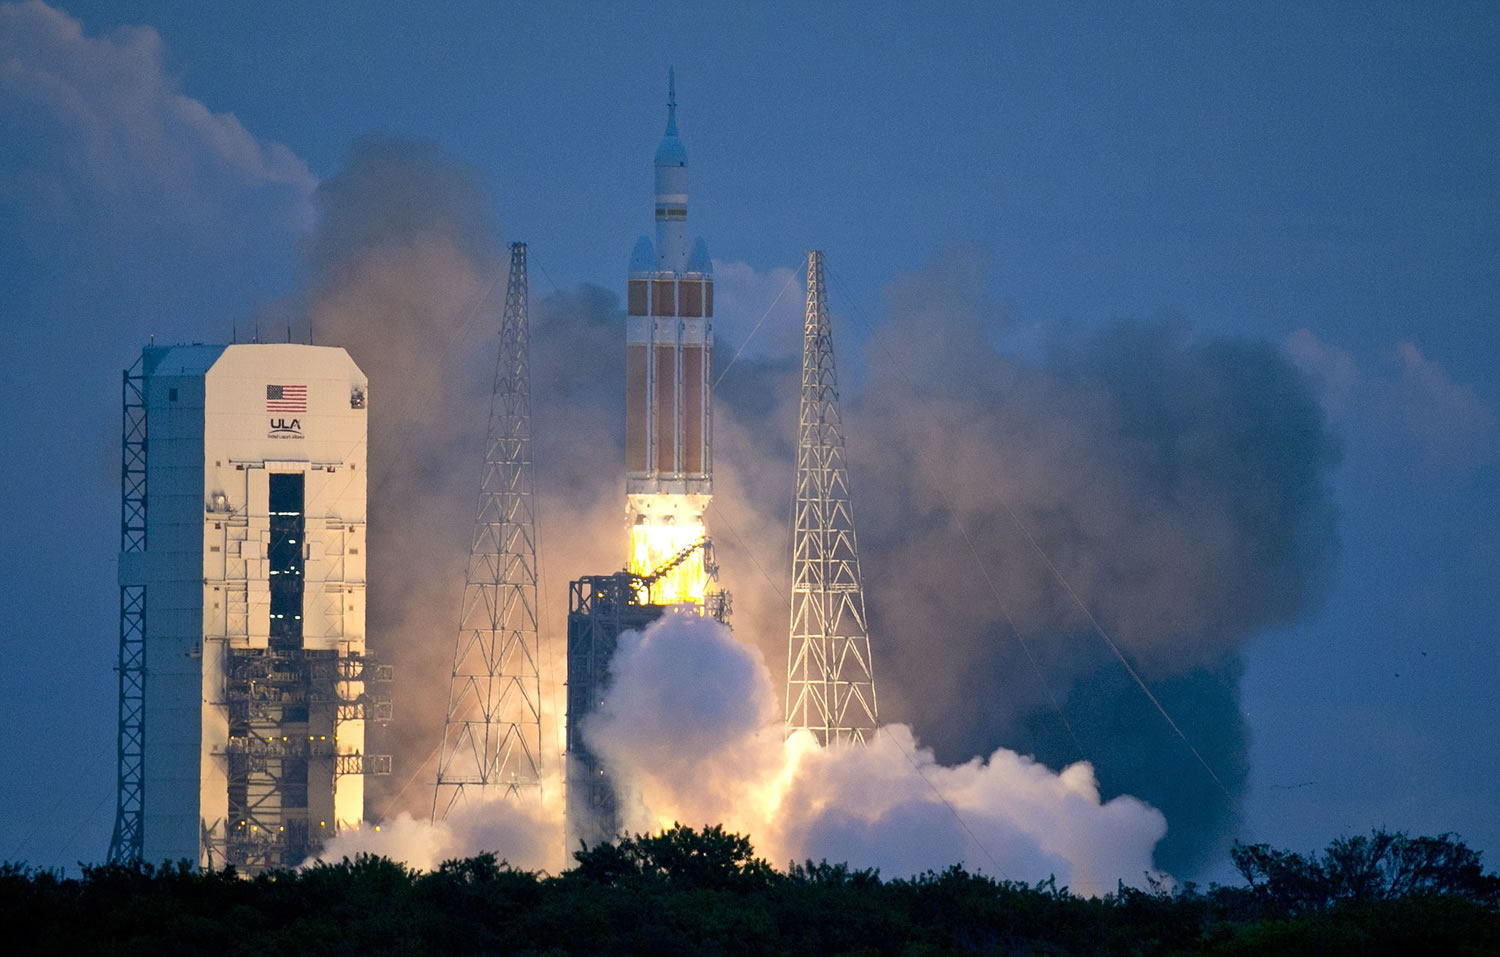 The NASA Orion space capsule atop a Delta IV rocket, in its first unmanned orbital test flight, lifts off from the Space Launch Complex 37B pad at the Cape Canaveral Air Force Station on Friday, Dec.